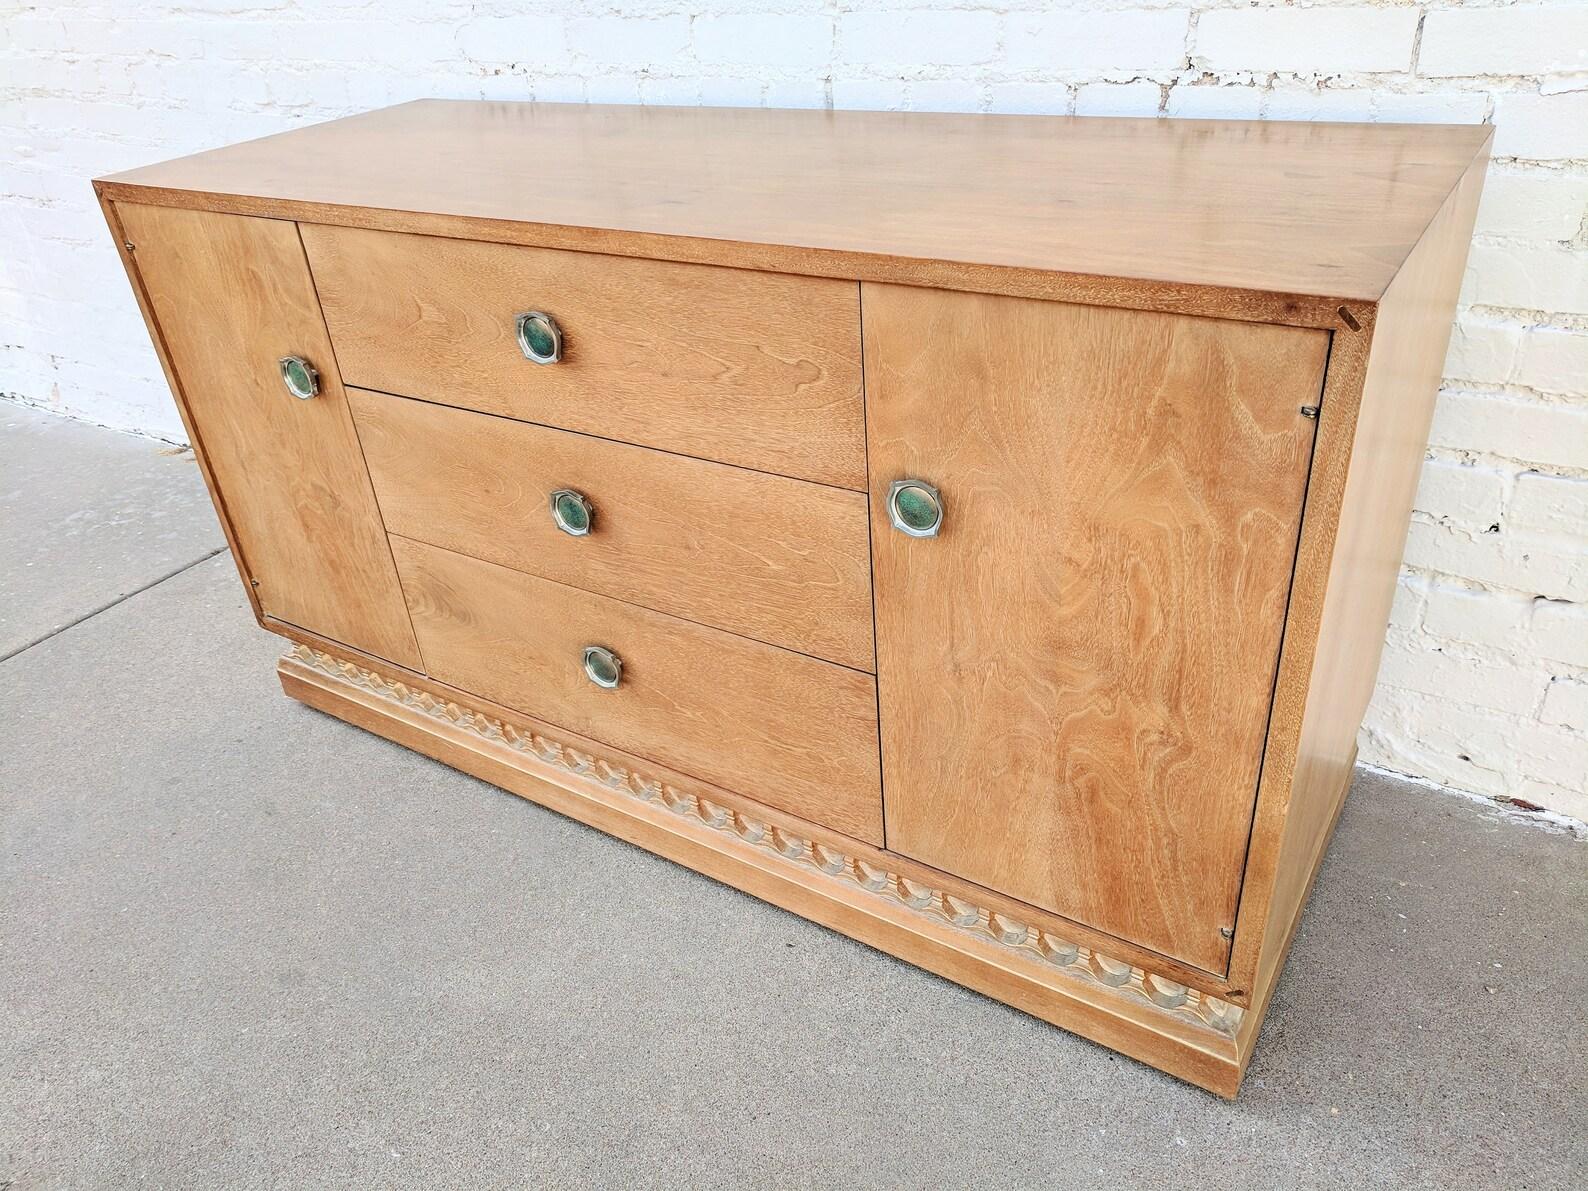 Mid Century Modern John van Koert for Drexel Casa Del Sol Buffet

Very good vintage condition. Really no condition issues to photograph other than some very slight finish wear on top of piece.

Additional information:
Materials: Wood
Vintage from